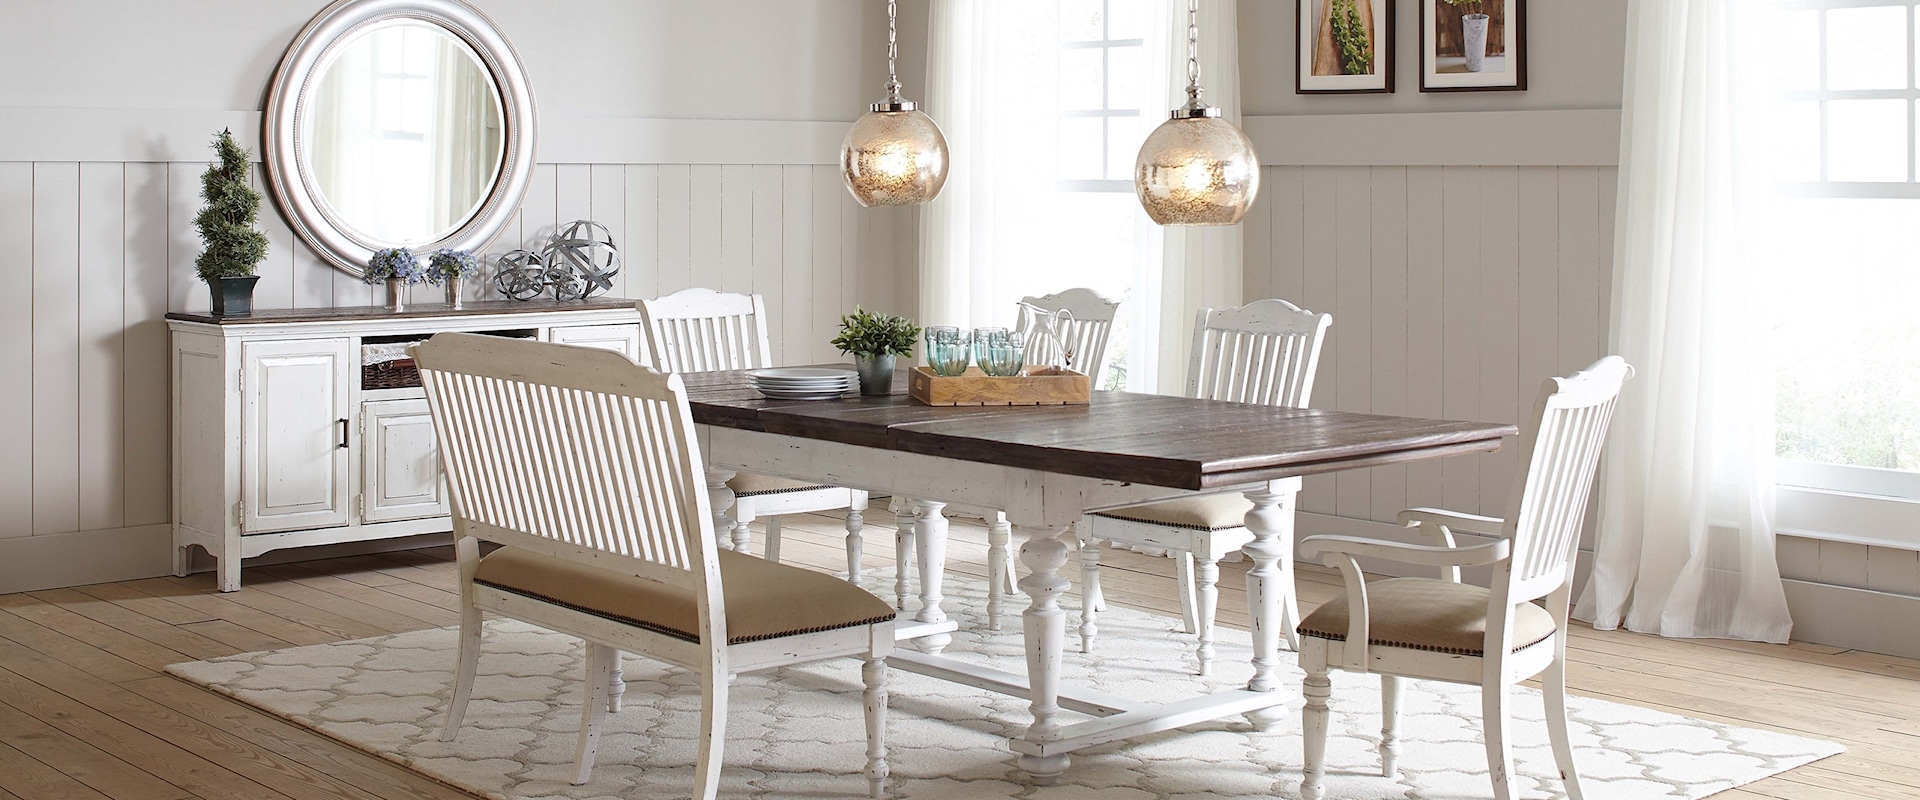 Dining Room Group with Rectangular Table